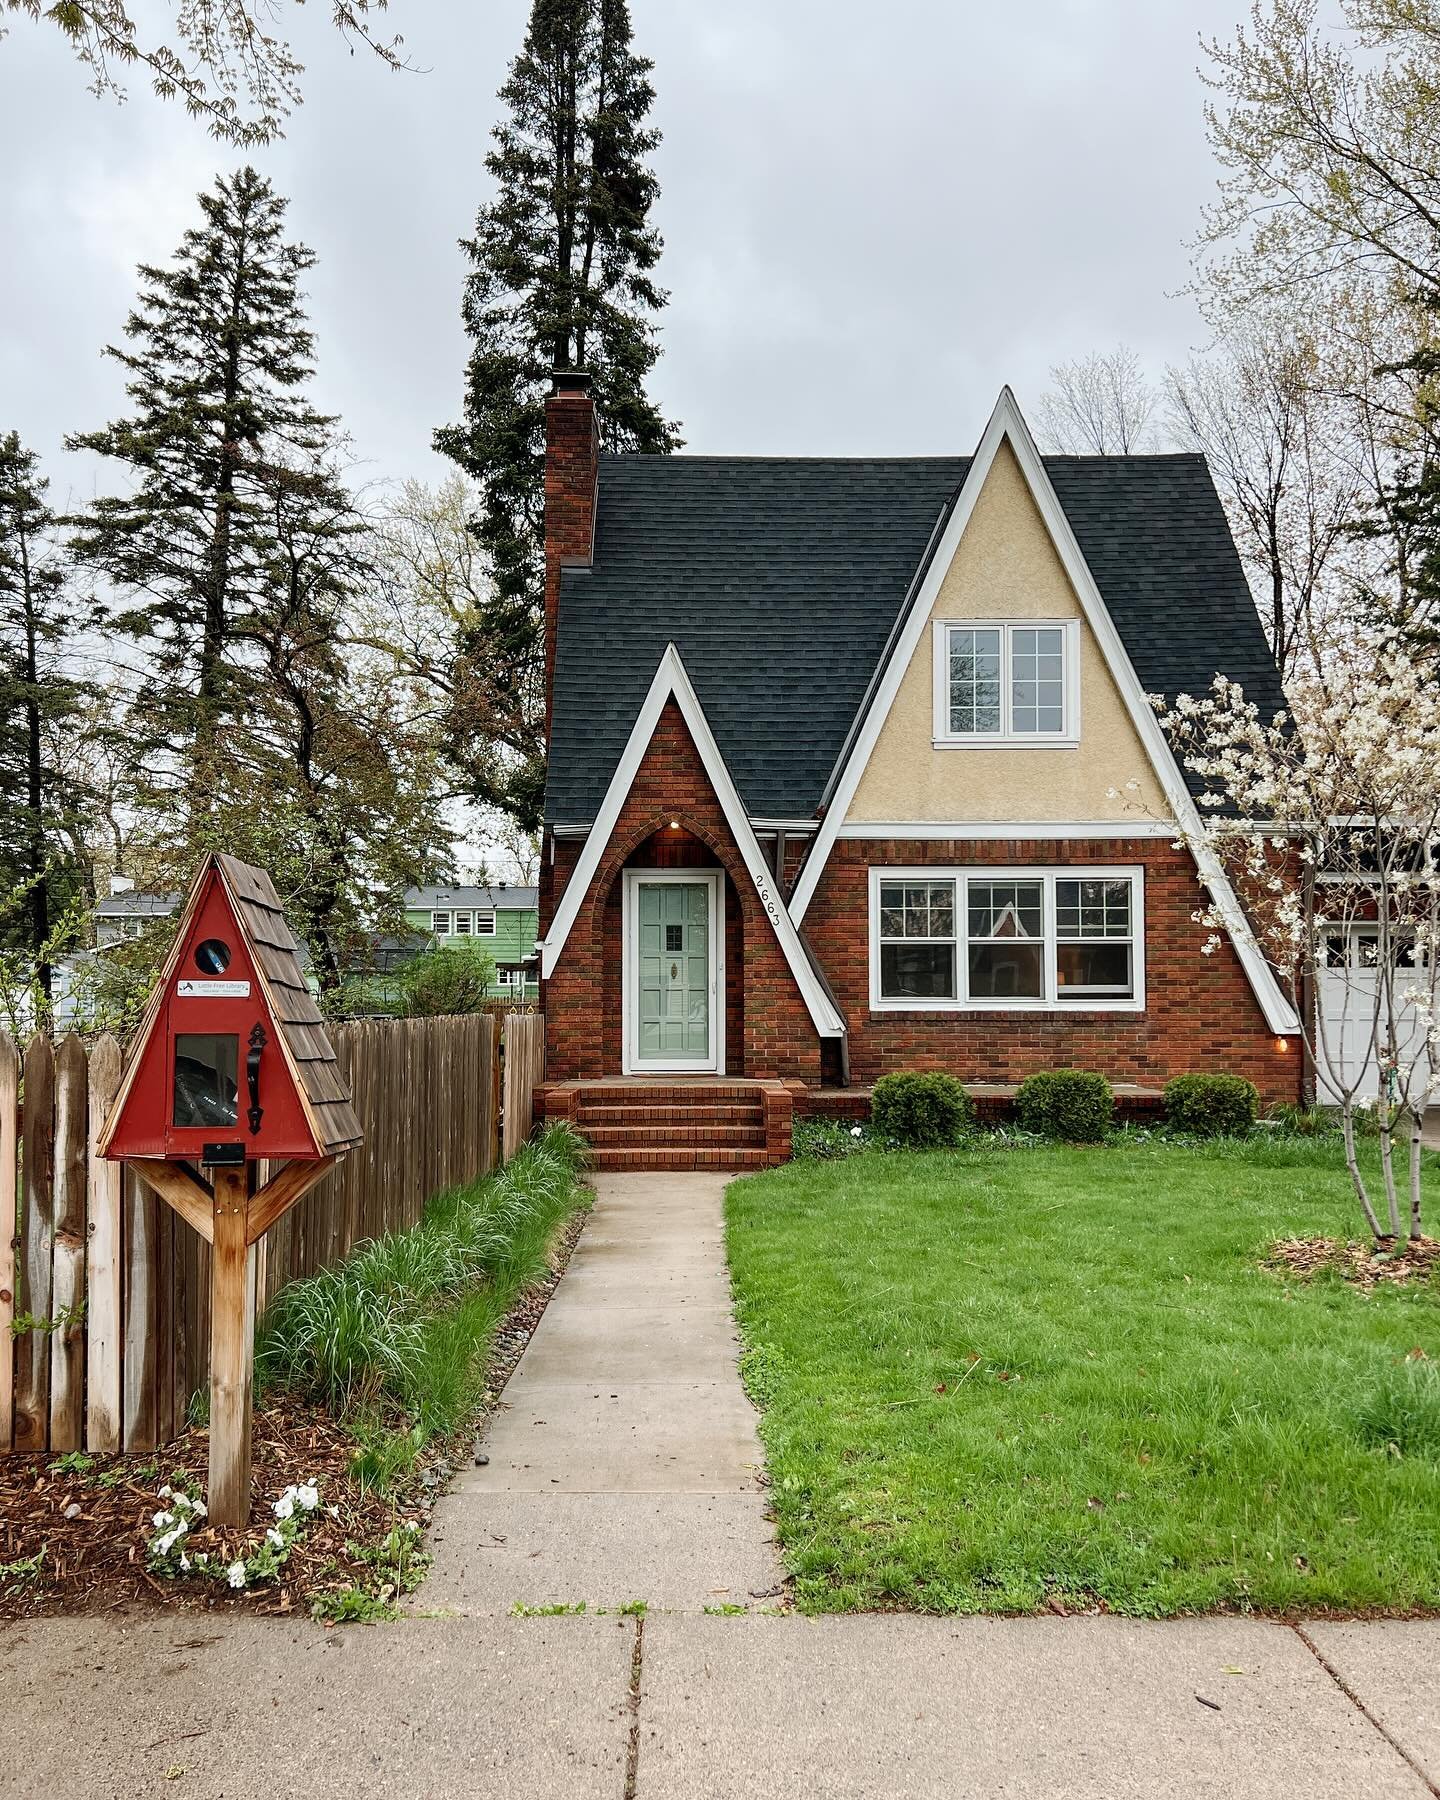 1936 Storybook tudor for sale in North St. Paul. Charming details, oversized lot. One of the cutiest exteriors I&rsquo;ve seen in a while!

Interested in finding your own home to love? Fill out my &lsquo;buy with me&rsquo; contact form in my profile 